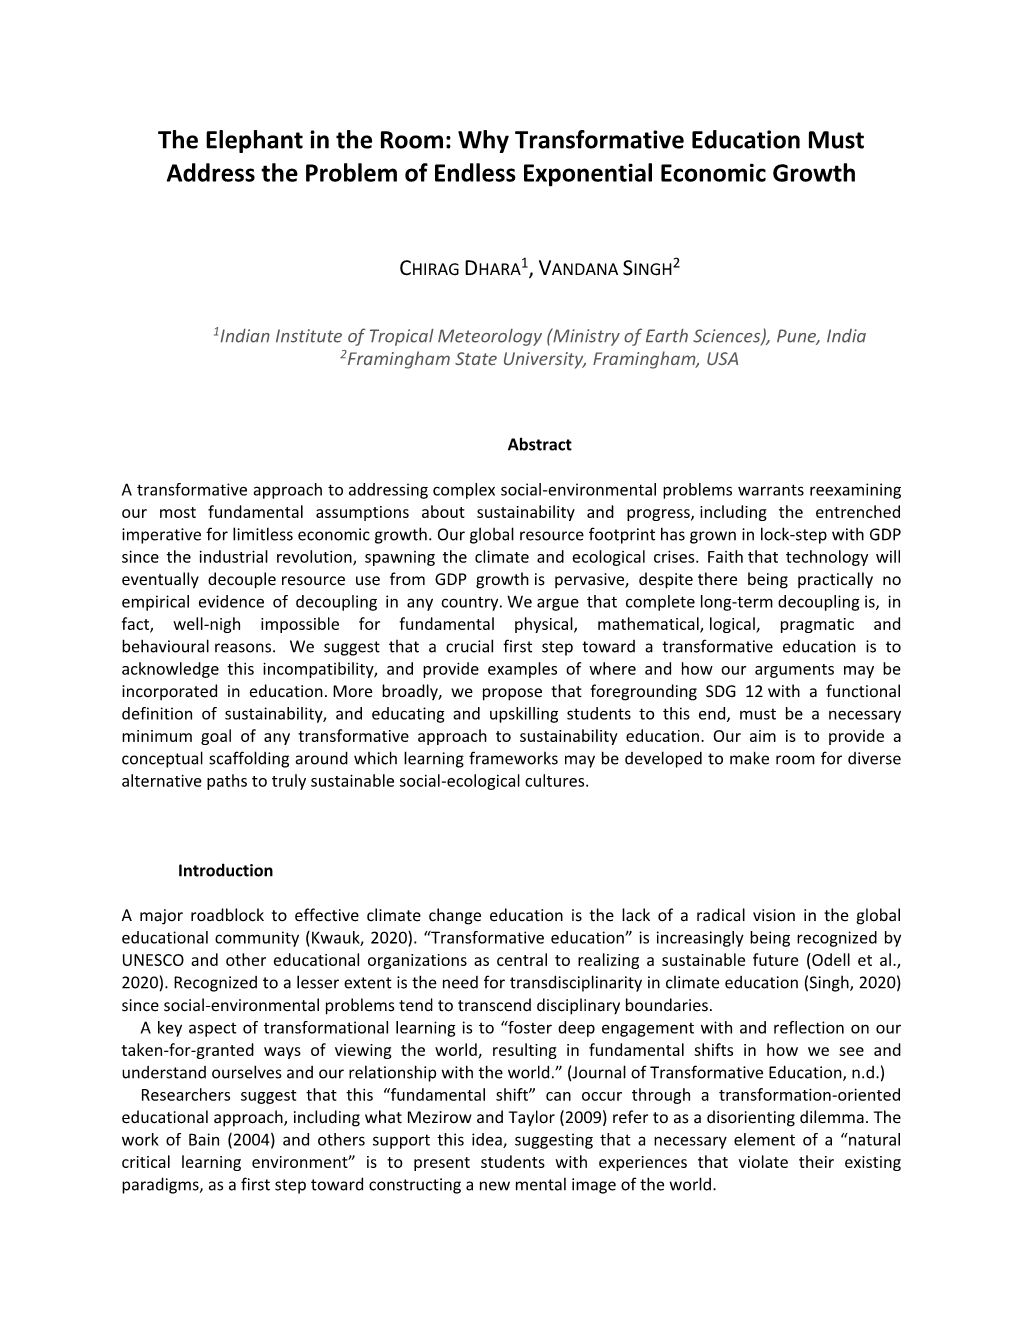 Why Transformative Education Must Address the Problem of Endless Exponential Economic Growth